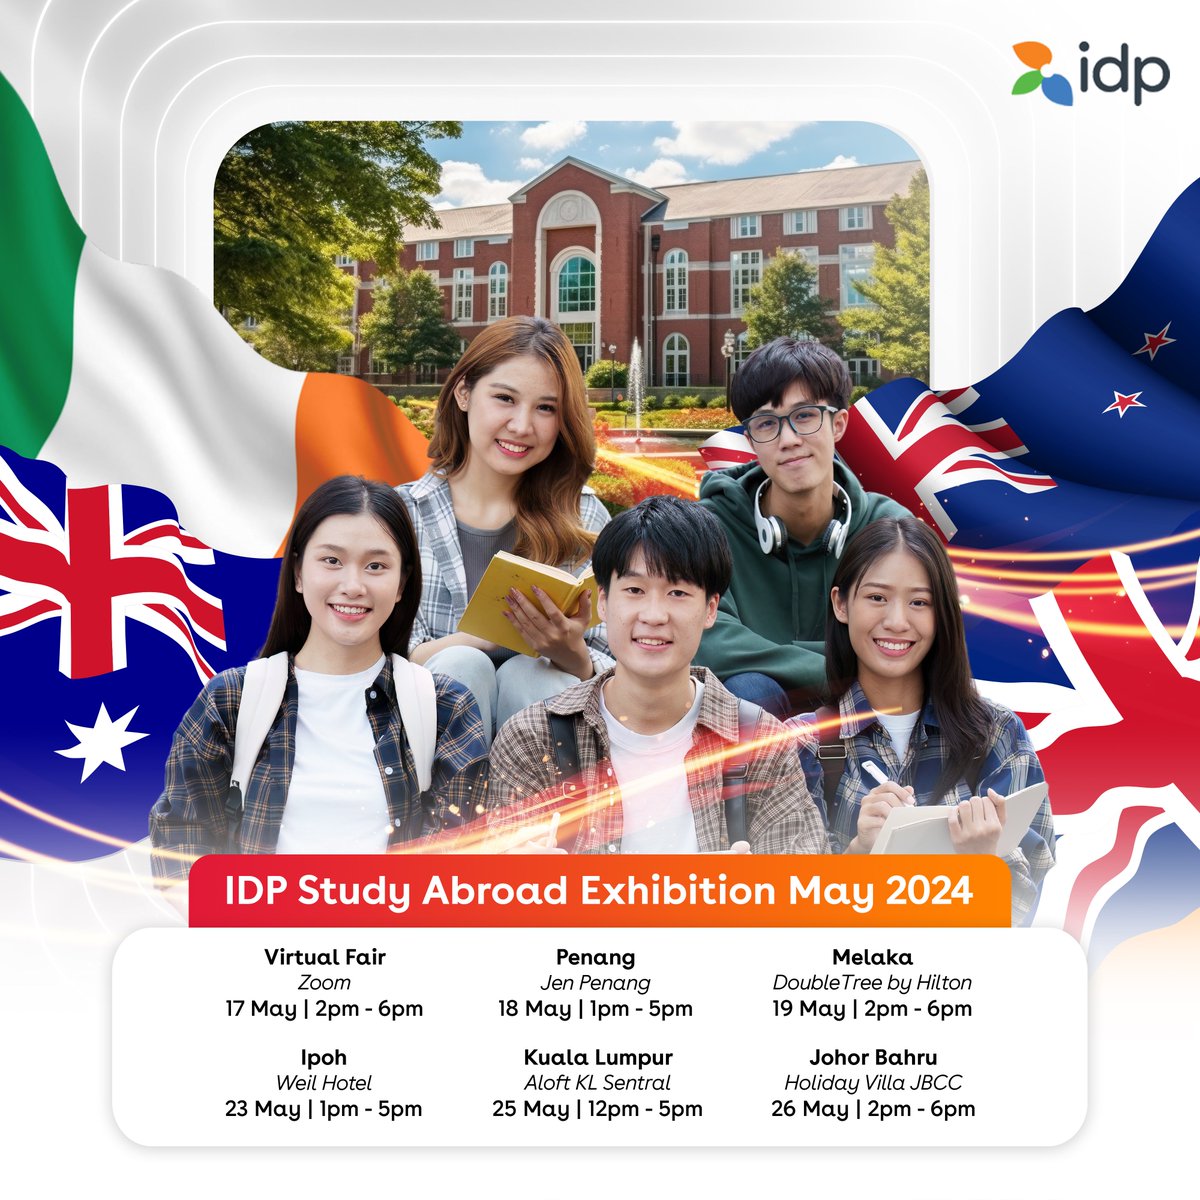 Attention all Malaysians- get ready for our upcoming exhibition!

The IDP Study Abroad Exhibition is headed your way, giving you the chance to interact with top unis both in-person & virtually.

Register now to join us for free & learn more about your options for studying abroad.